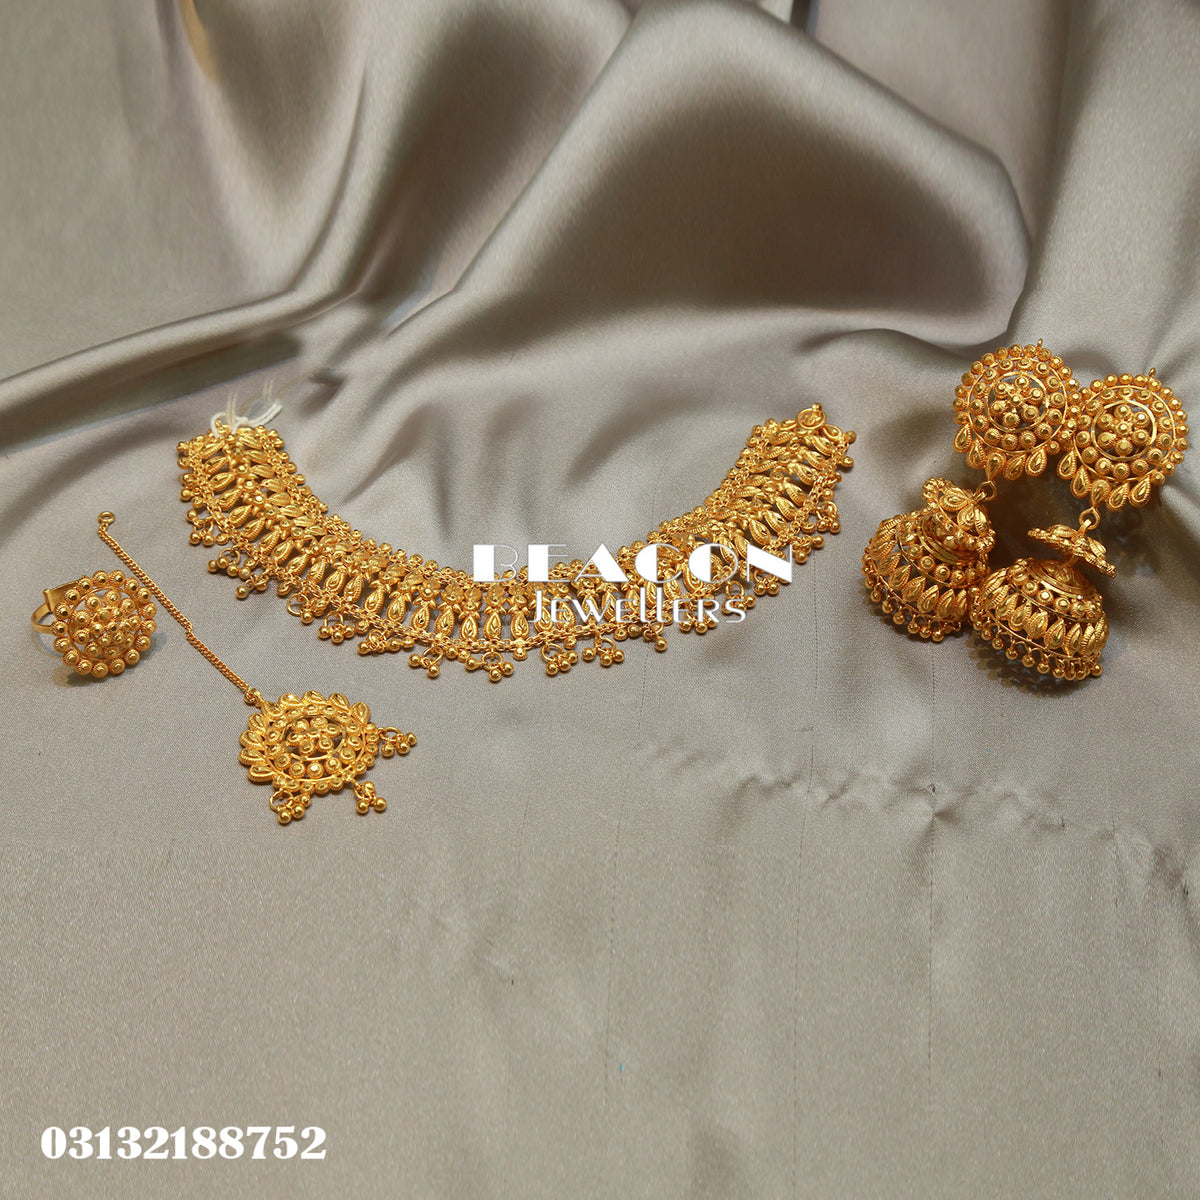 Necklace with Bindi and Earrings 40